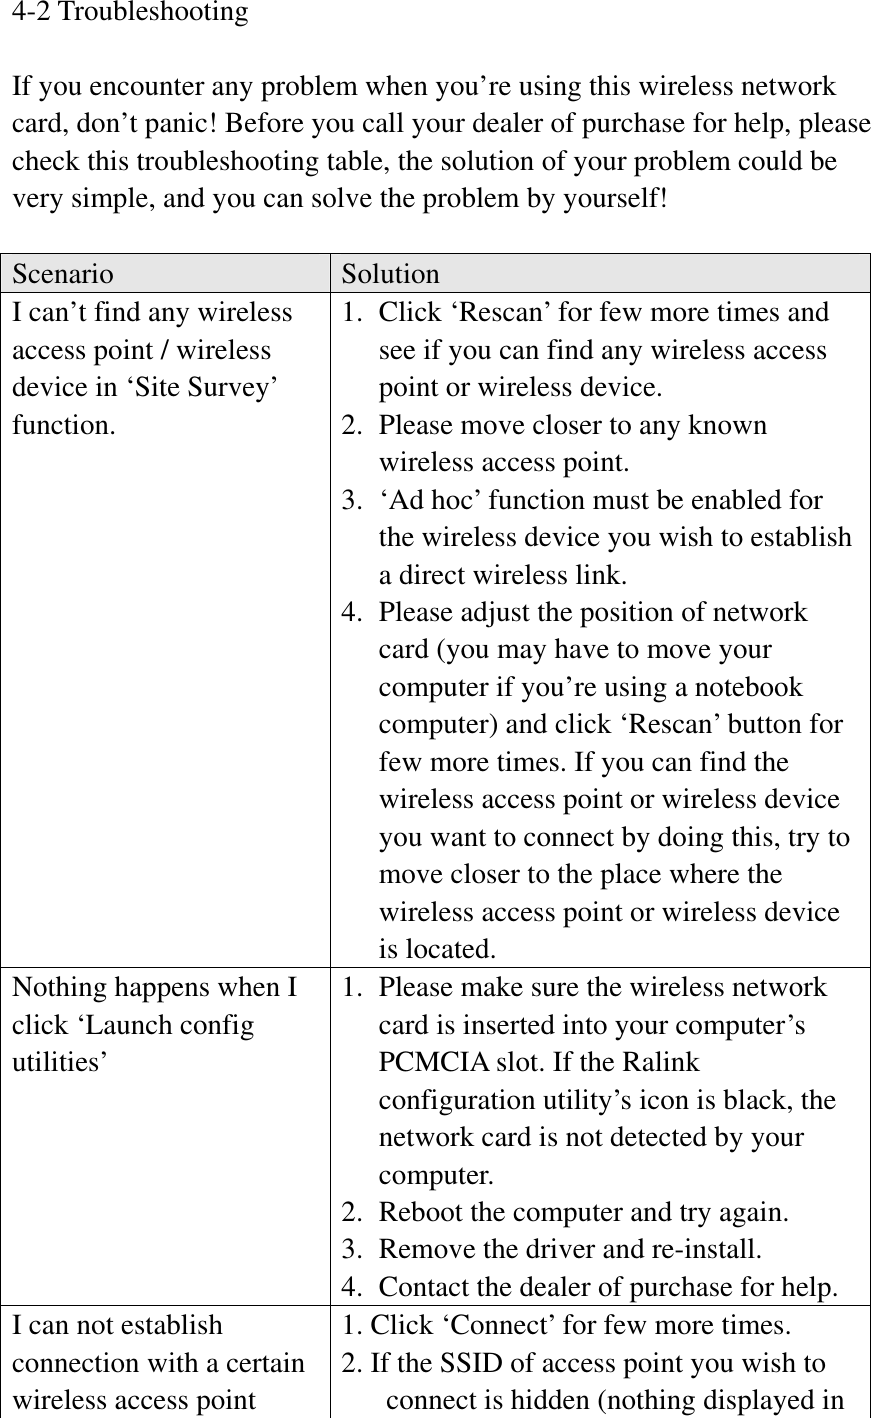 4-2 Troubleshooting If you encounter any problem when you’re using this wireless network card, don’t panic! Before you call your dealer of purchase for help, please check this troubleshooting table, the solution of your problem could be very simple, and you can solve the problem by yourself! Scenario SolutionI can’t find any wireless access point / wireless device in ‘Site Survey’ function.1. Click ‘Rescan’ for few more times and see if you can find any wireless access point or wireless device. 2. Please move closer to any known wireless access point. 3. ‘Ad hoc’ function must be enabled for the wireless device you wish to establish a direct wireless link. 4. Please adjust the position of network card (you may have to move your computer if you’re using a notebook computer) and click ‘Rescan’ button for few more times. If you can find the wireless access point or wireless device you want to connect by doing this, try to move closer to the place where the wireless access point or wireless device is located. Nothing happens when I click ‘Launch config utilities’1. Please make sure the wireless network card is inserted into your computer’s PCMCIA slot. If the Ralink configuration utility’s icon is black, the network card is not detected by your computer. 2. Reboot the computer and try again. 3. Remove the driver and re-install. 4. Contact the dealer of purchase for help. I can not establish connection with a certain wireless access point 1. Click ‘Connect’ for few more times. 2. If the SSID of access point you wish to connect is hidden (nothing displayed in 